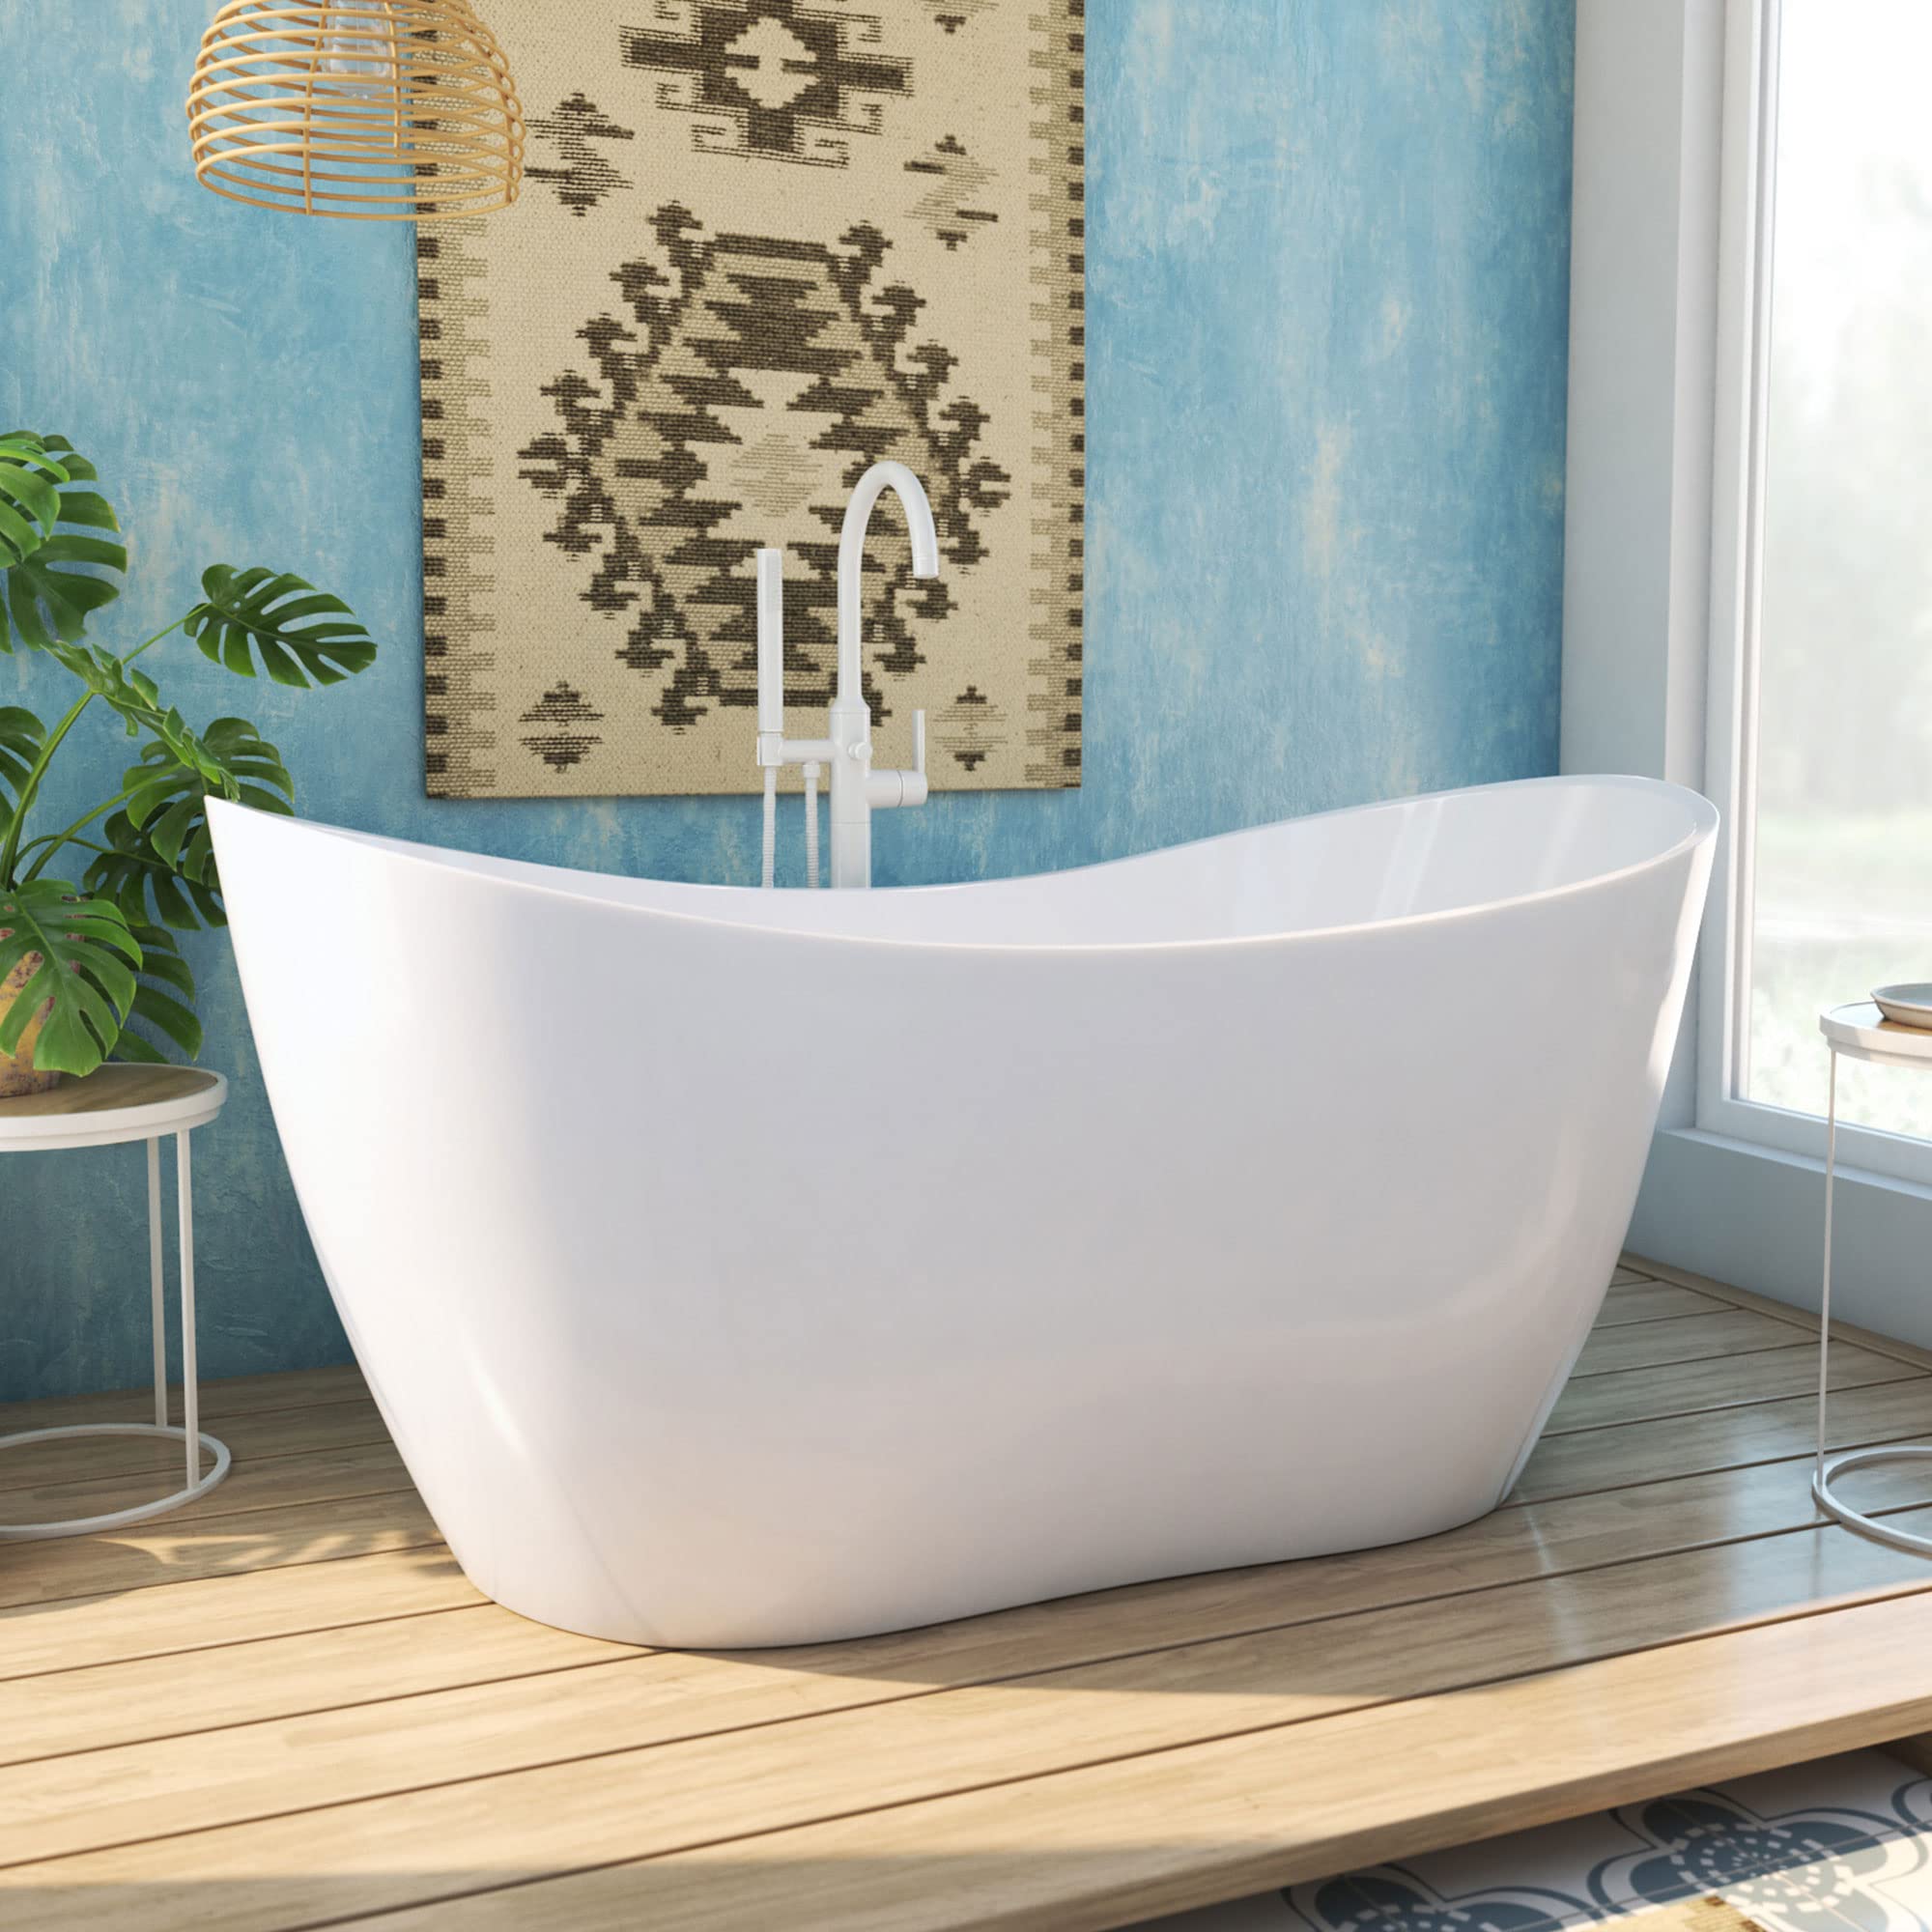 DreamLine Nile 59 in. L x 28 in. H Acrylic Freestanding Bathtub with White Finish